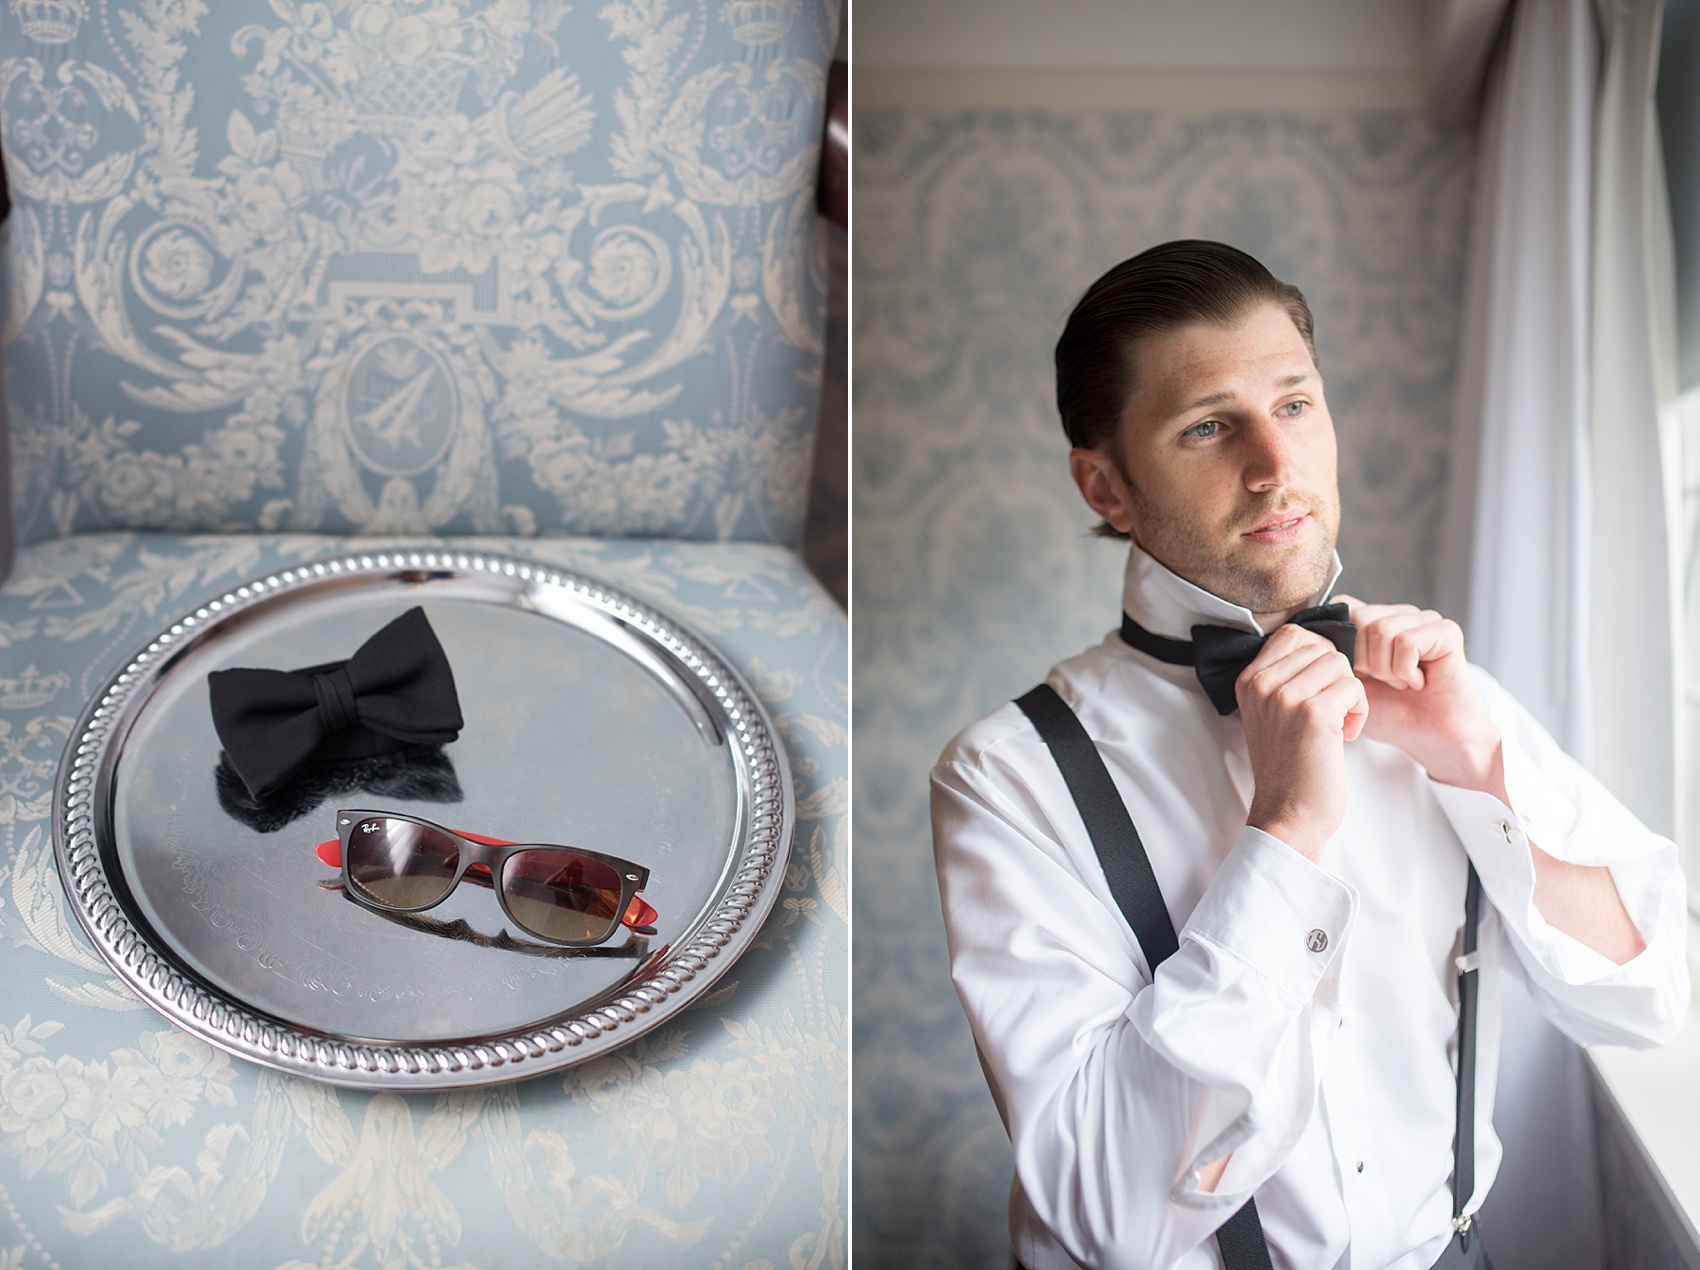 Getting ready at The Simsbury Inn, Connecticut. Images by NYC wedding photographer Mikkel Paige Photography.